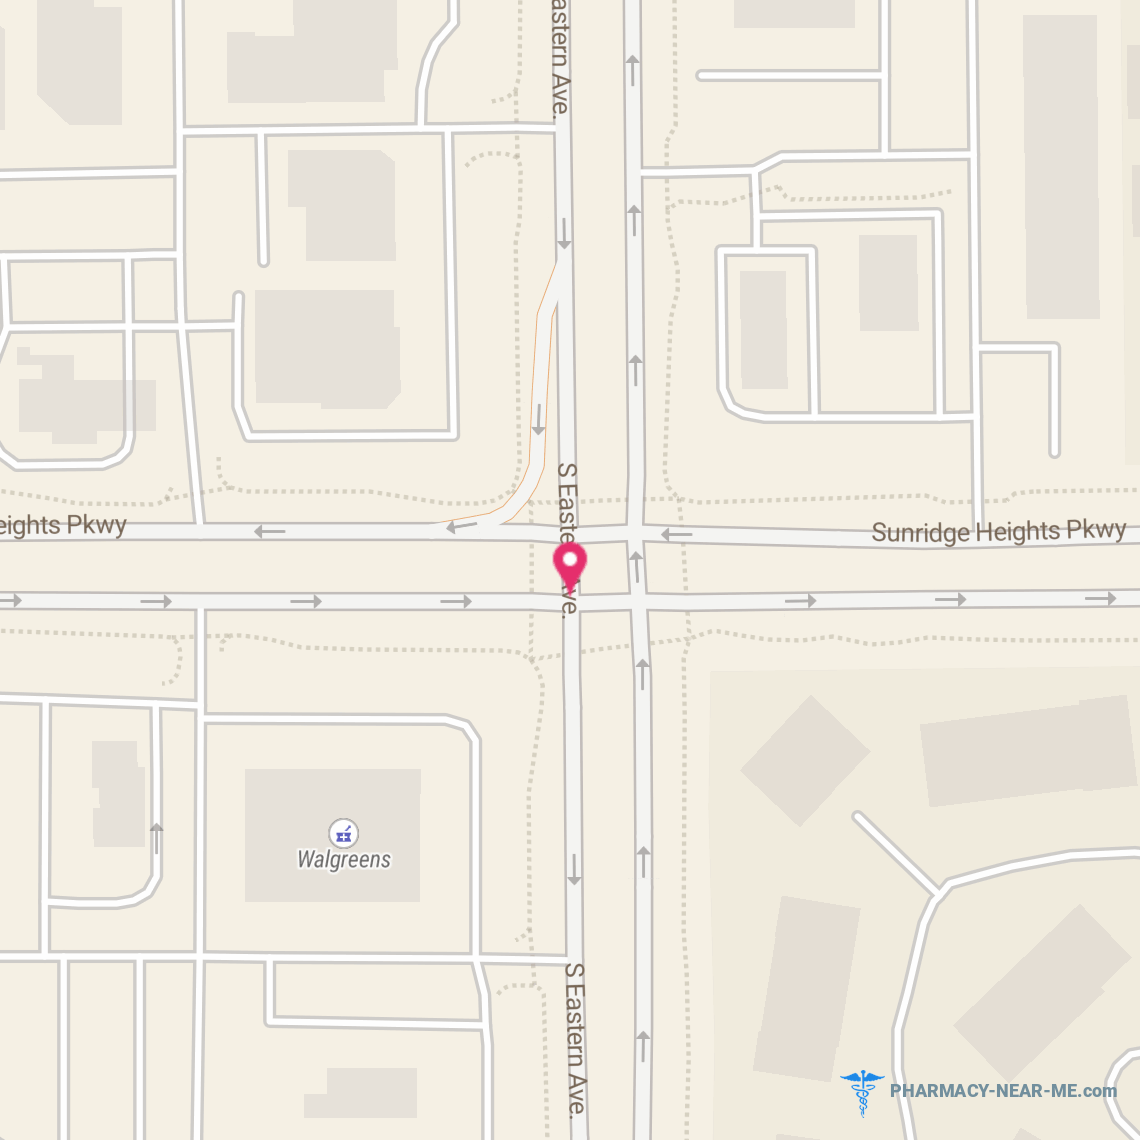 WALGREENS #06545 - Pharmacy Hours, Phone, Reviews & Information: 11001 South Eastern Avenue, Henderson, Nevada 89052, United States